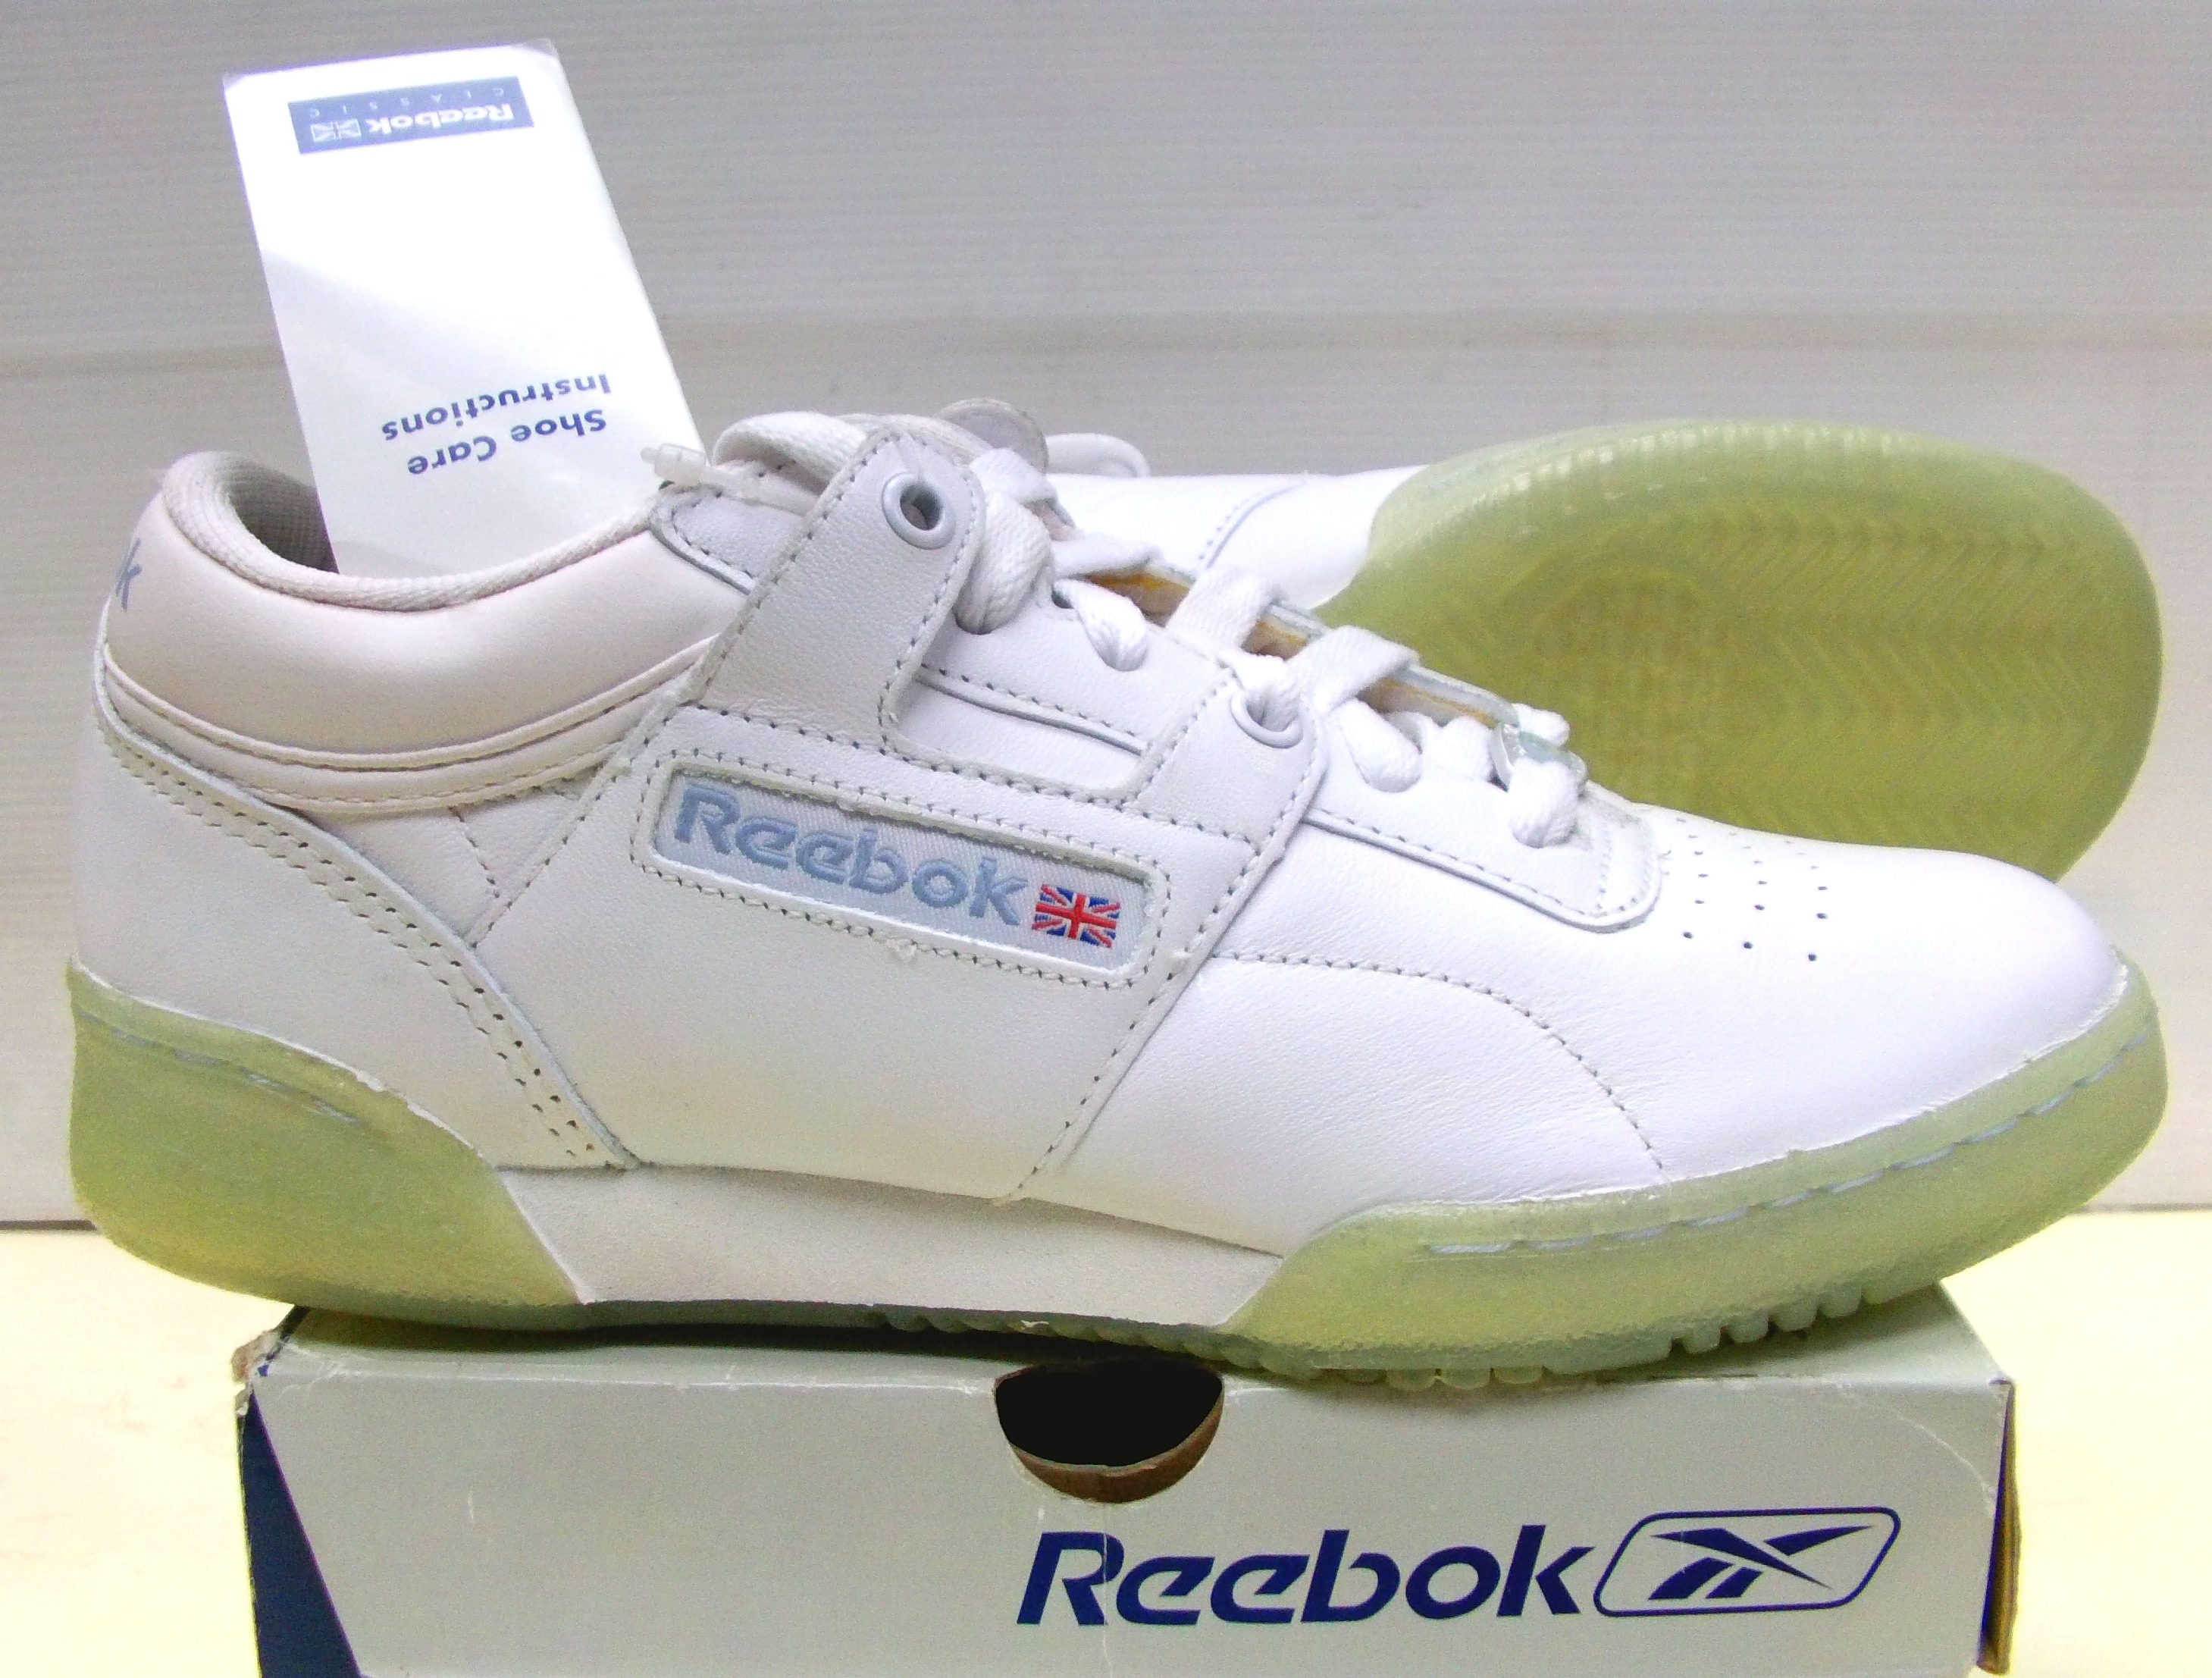 Reebok shoes Work out Low Ice SE INTL Size UK 4.5 Eur 37.5 Product : 2-140860